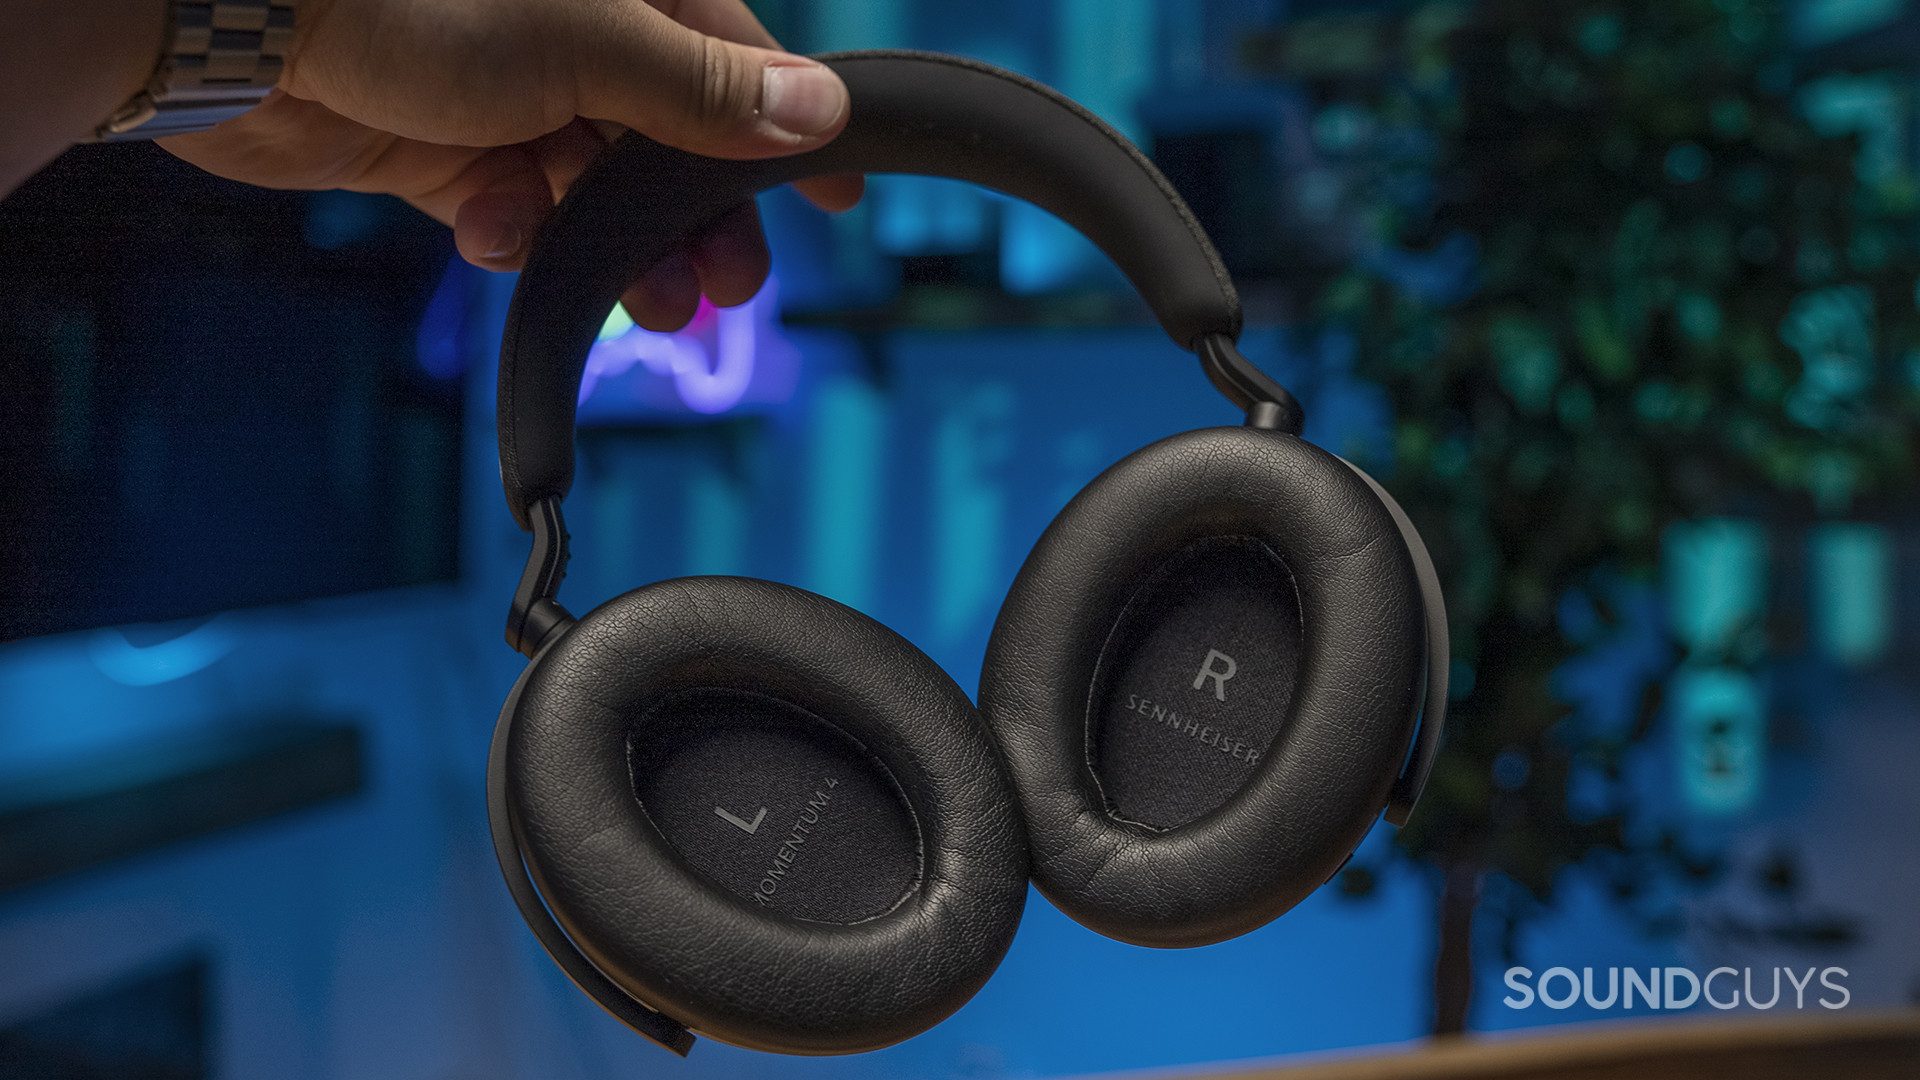 Thick pads dress the ear cups and band of the Sennheiser Momentum 4 Wireless.